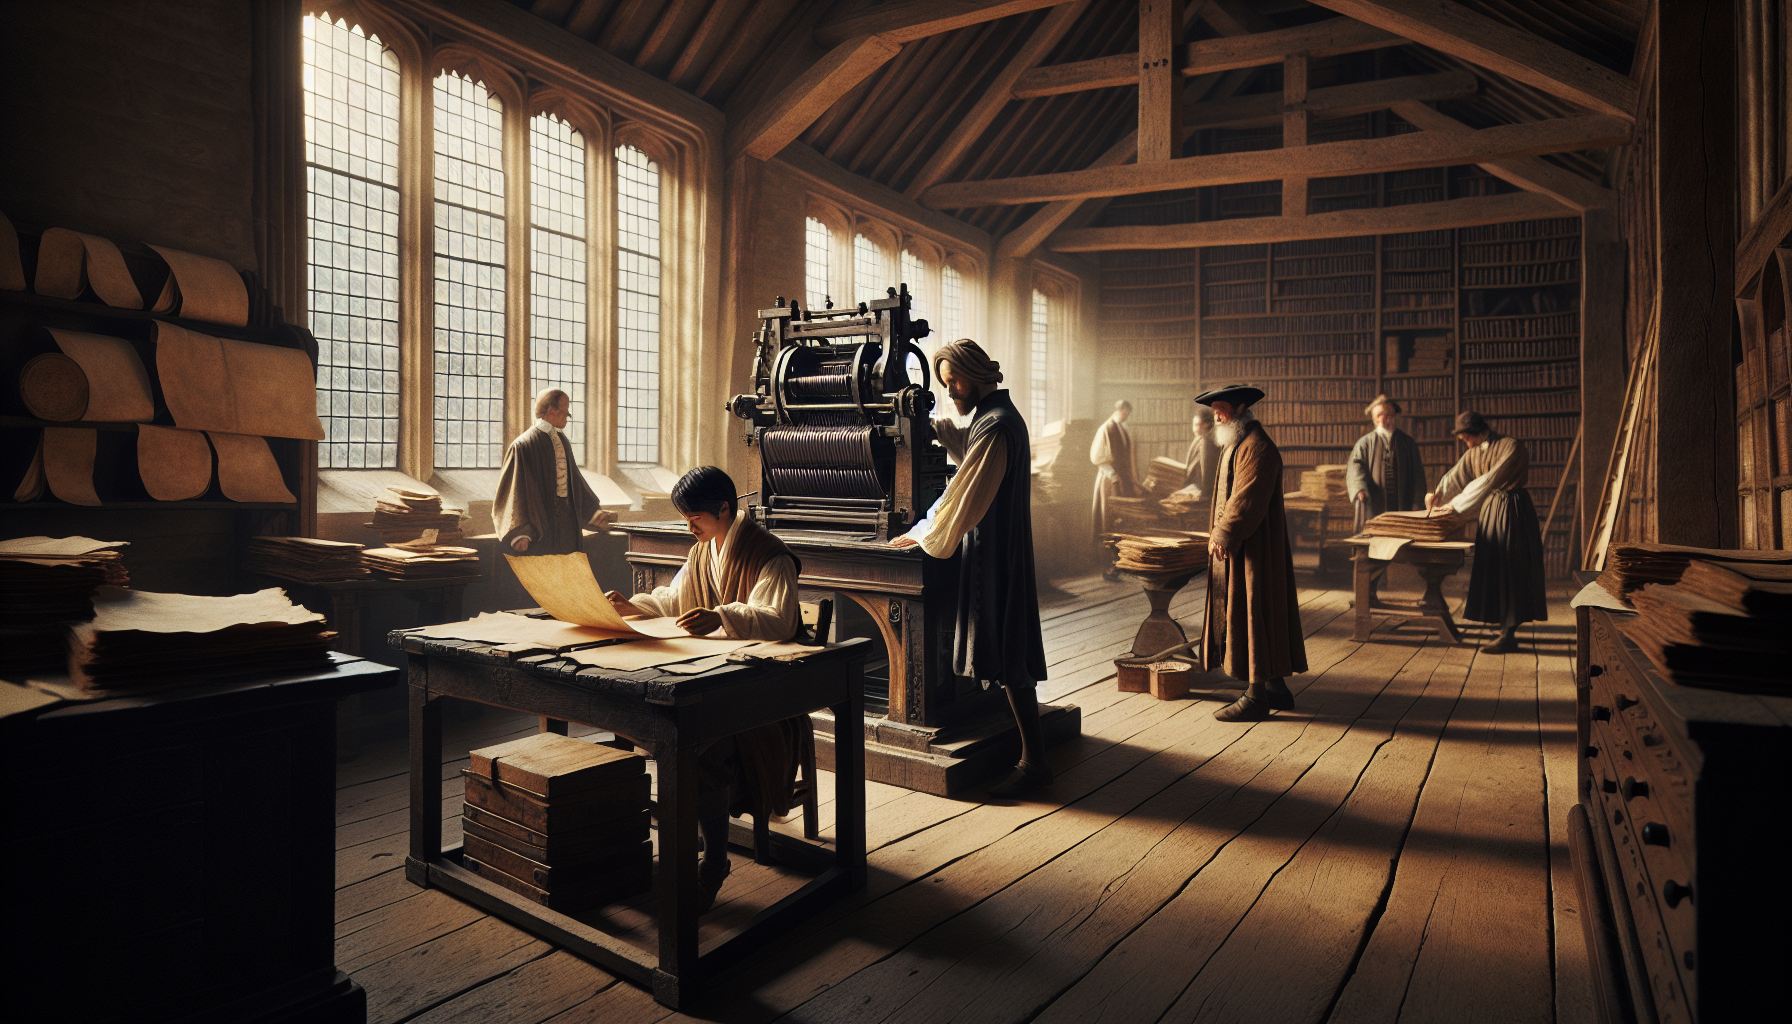 Illustration of early days of printing